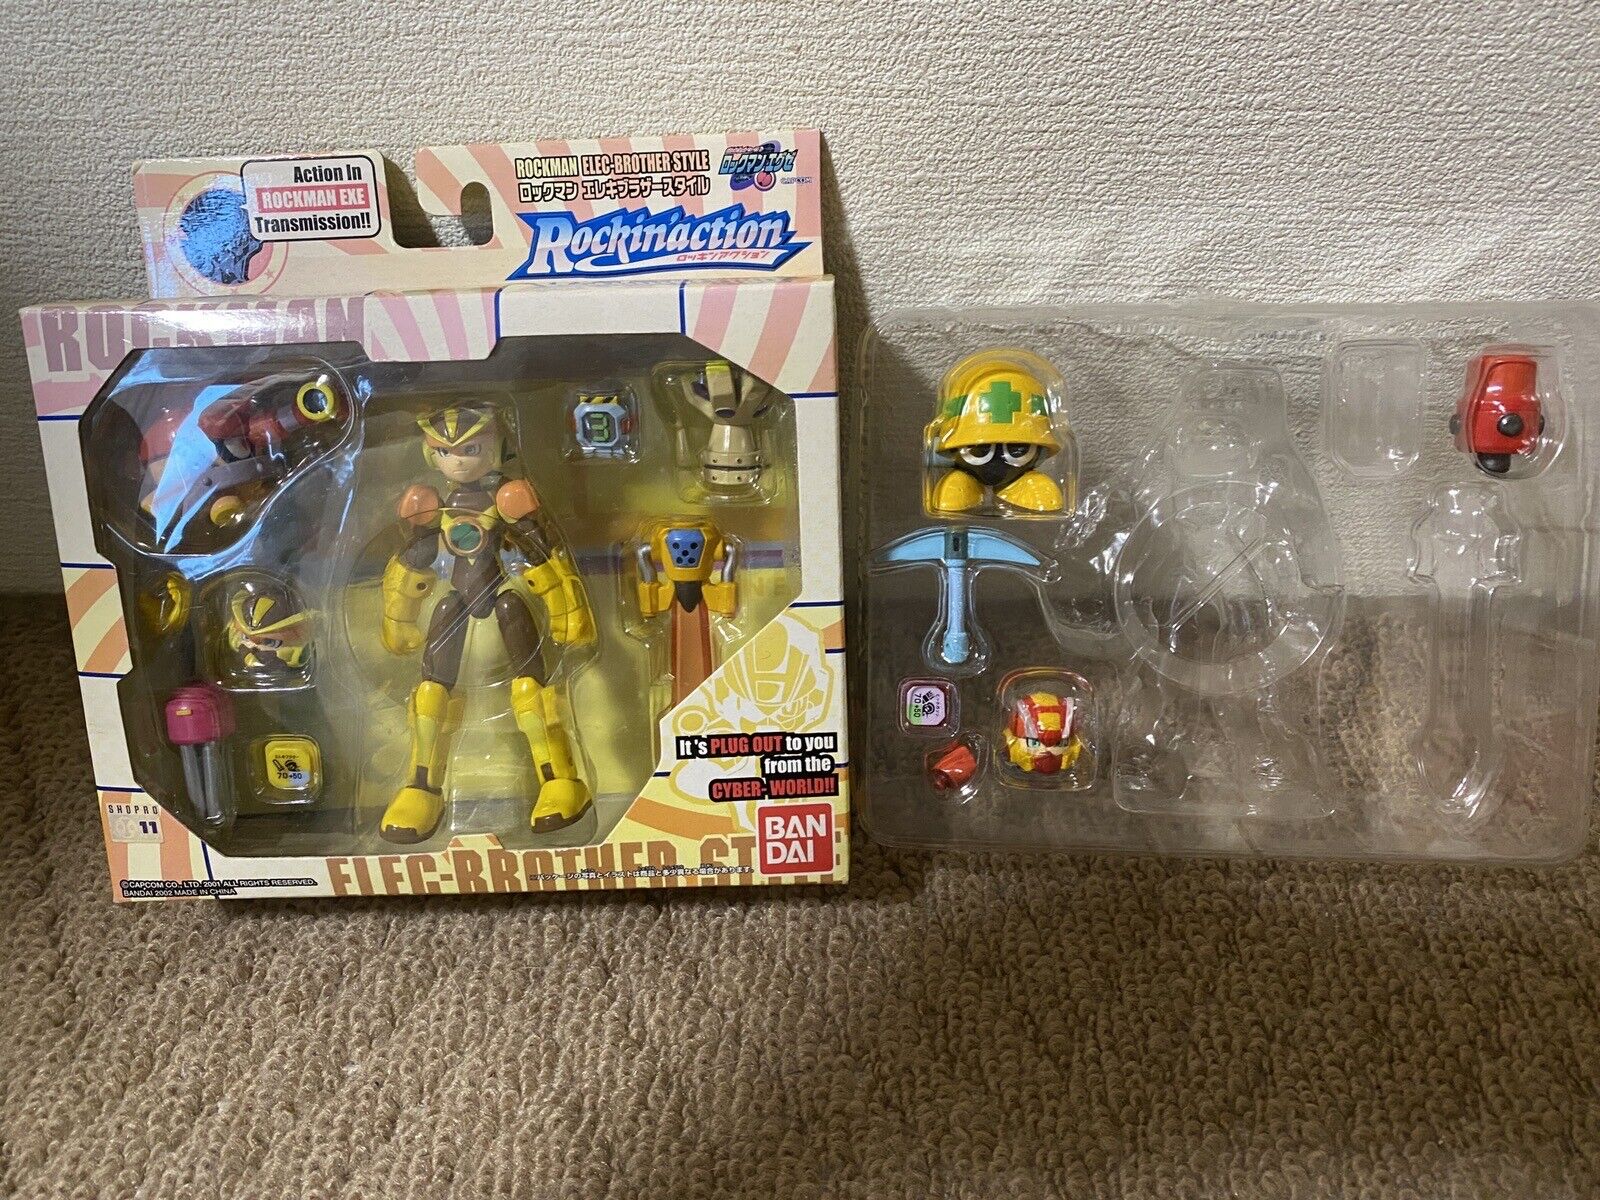 Megaman Exe Rockin Action Electric Brother Style w/Heat style parts Japan